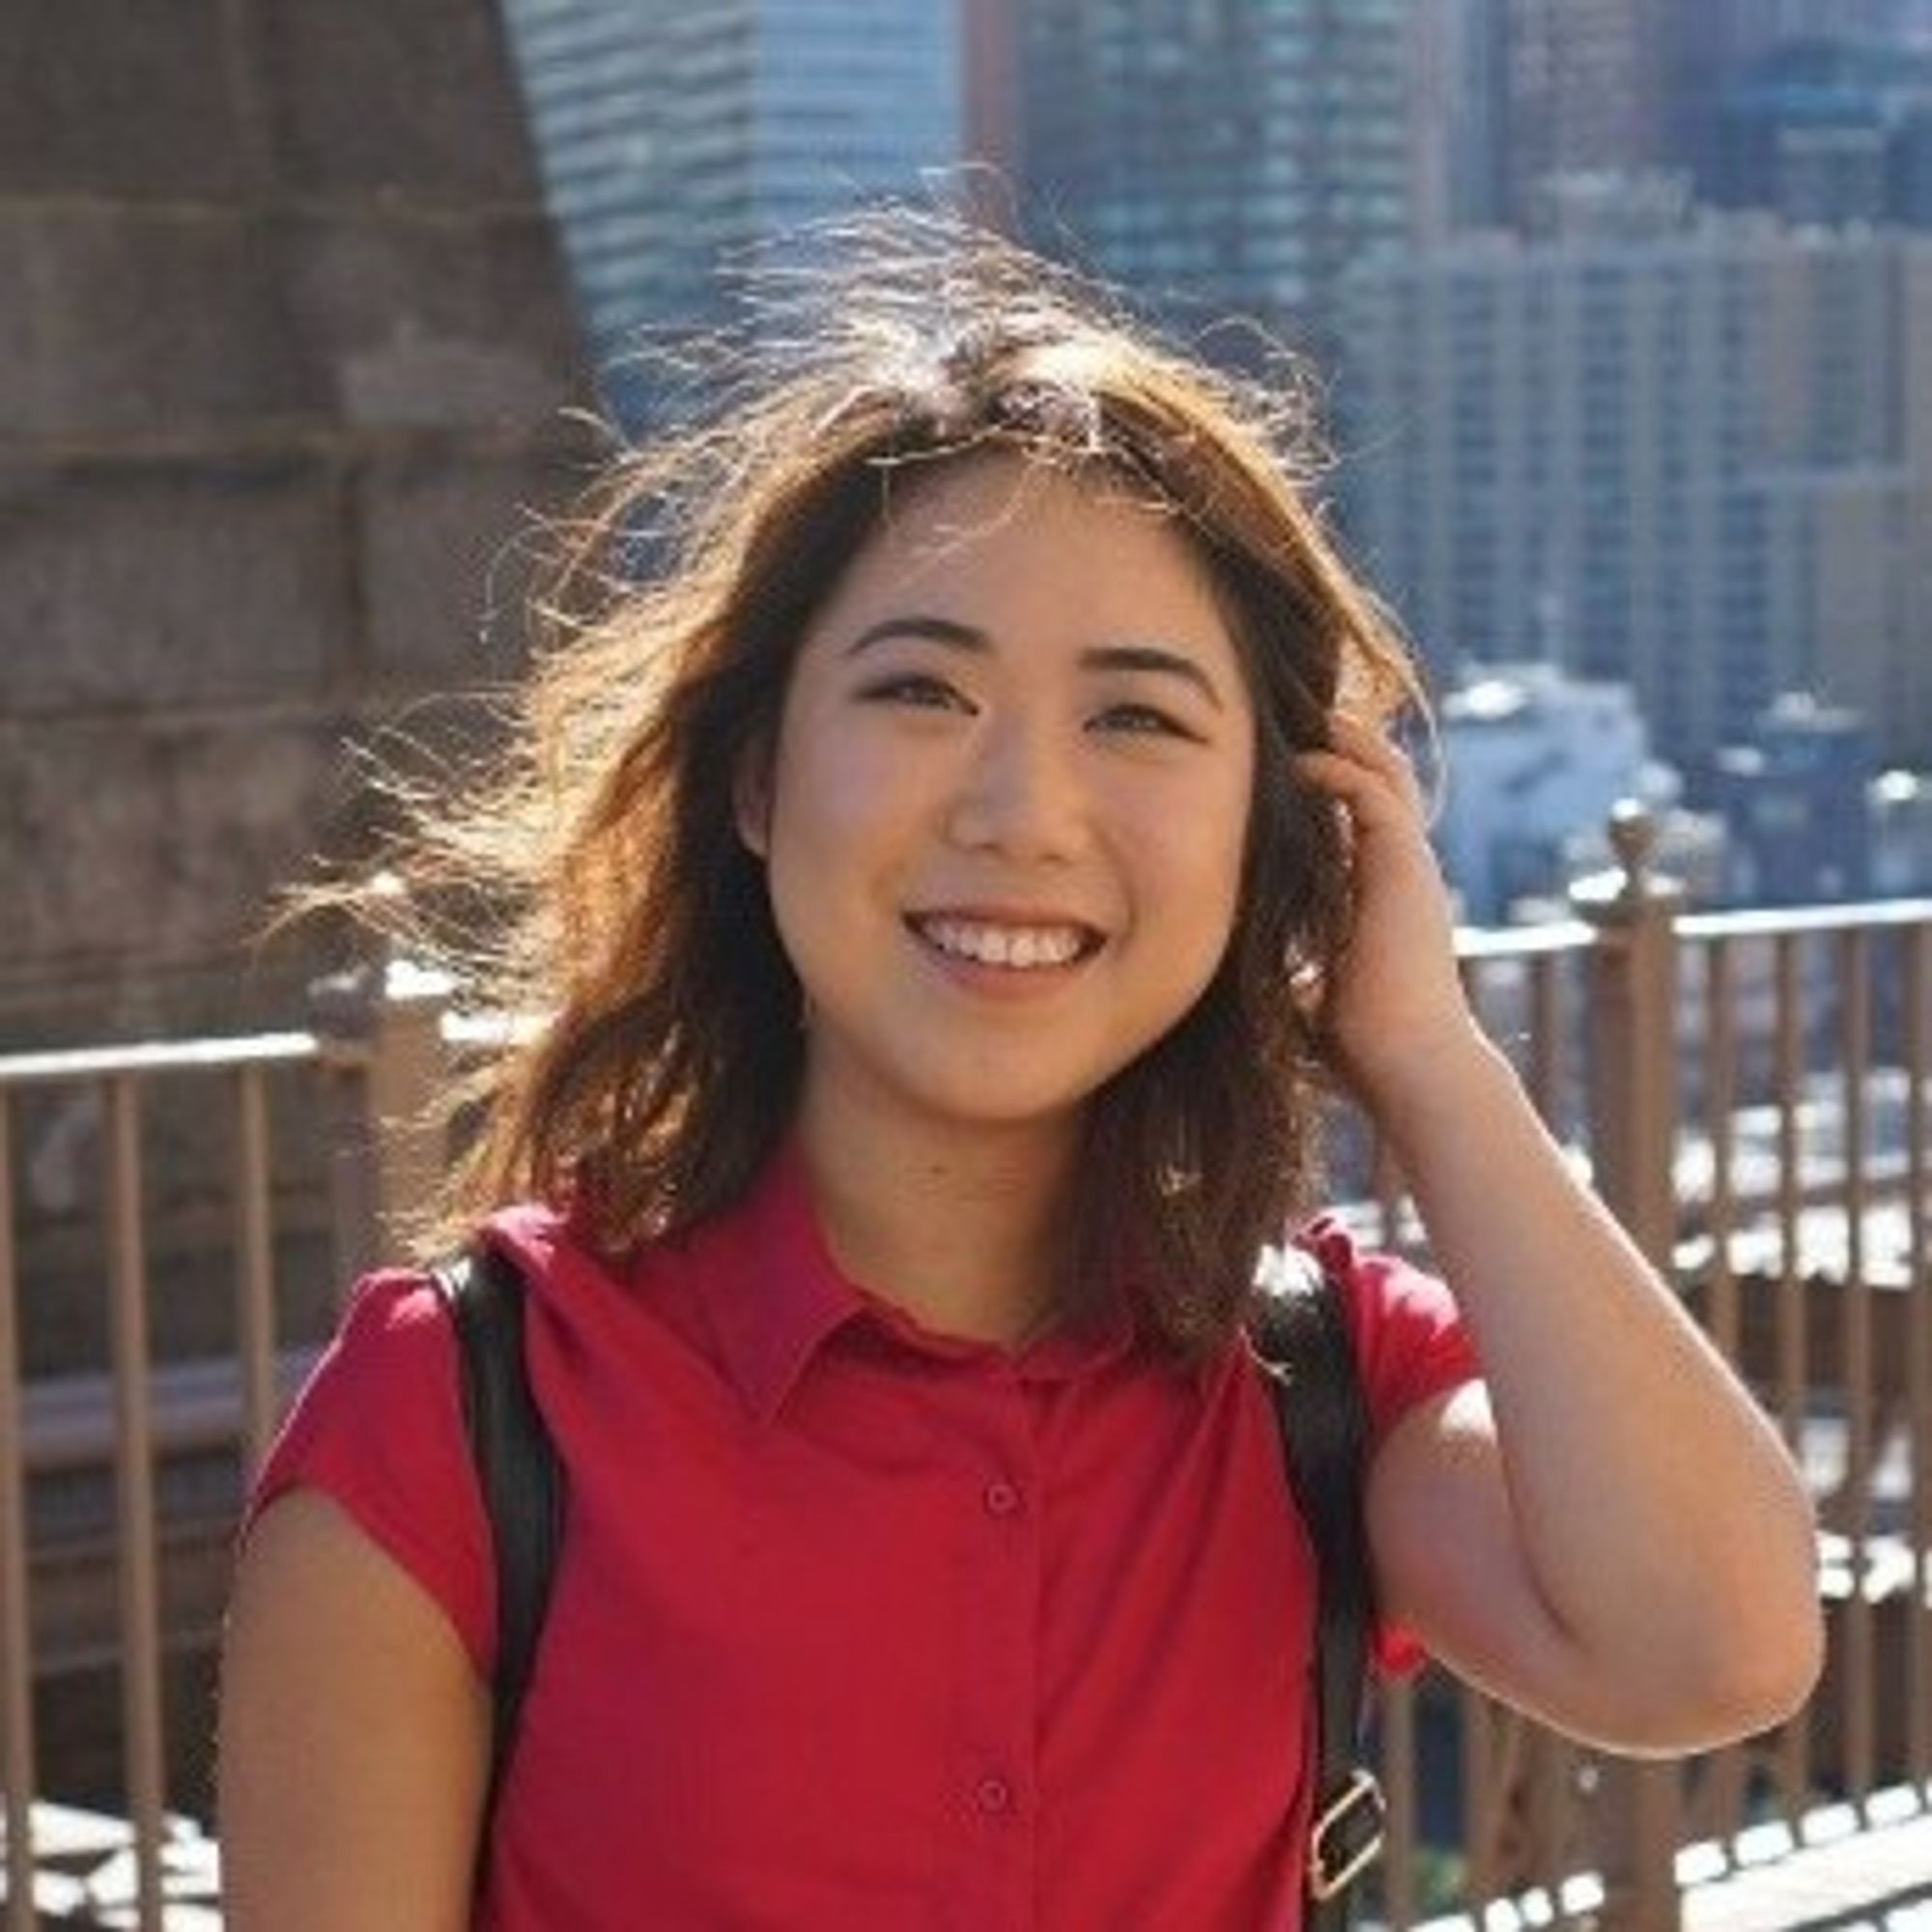 Amanda Yam
Product designer
Prior Product designer @Nightfall AI and UX Visual designer @TIBCO Software • Loves illustration, house plants, learning how to use power tools, and her Australian cattle dog Pepper!